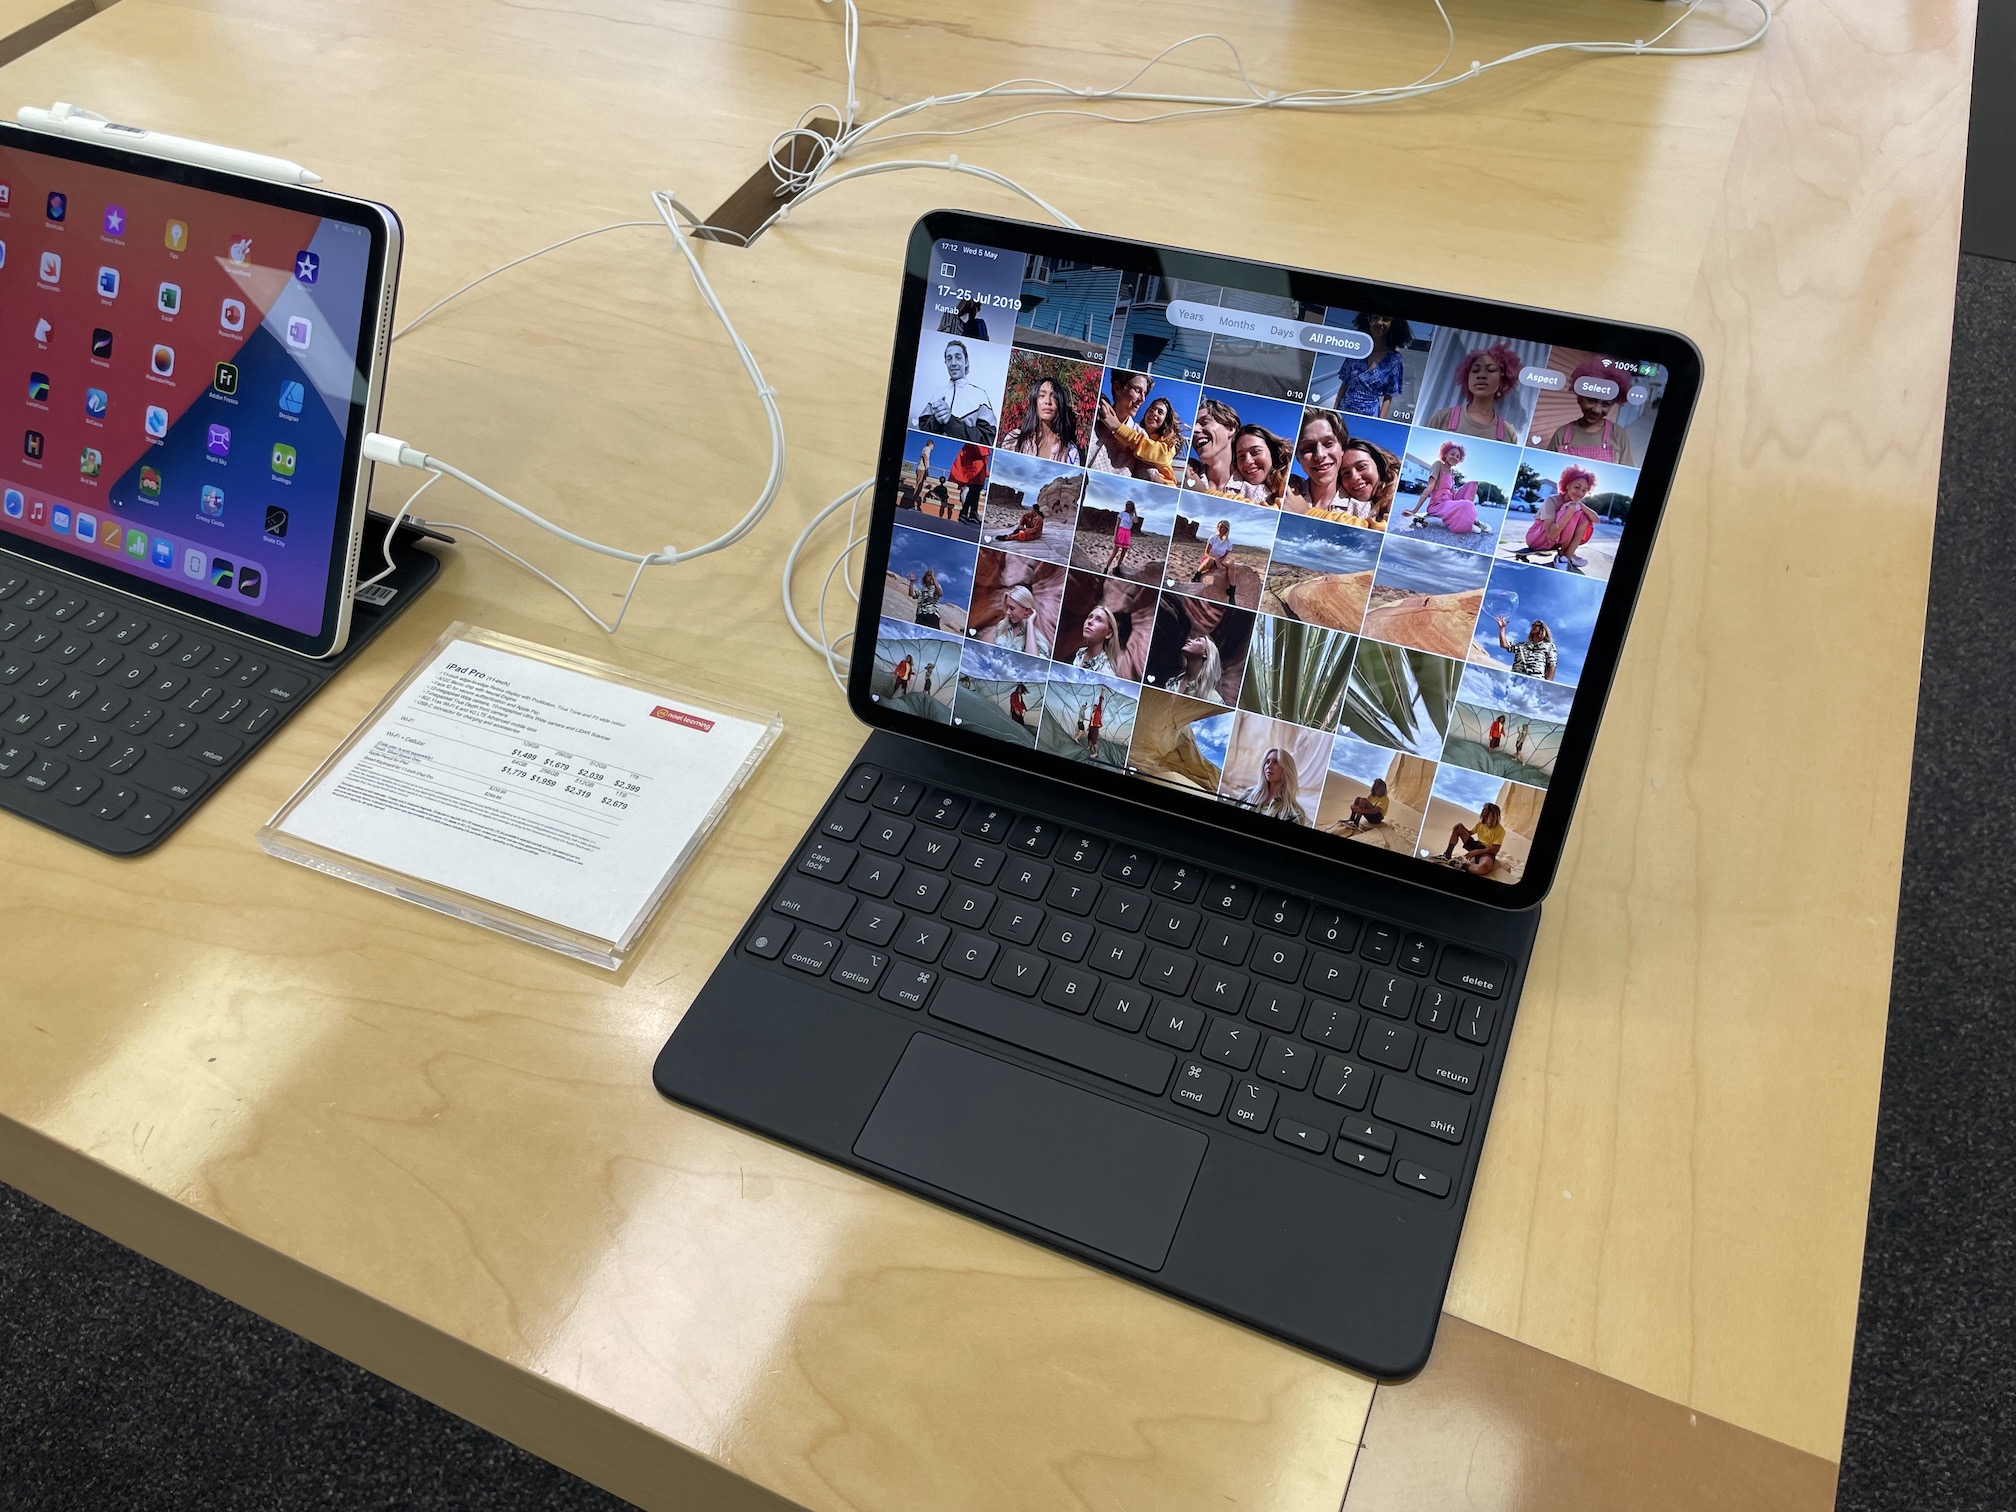 A photo of an iPad Pro set up for display inside of a Noel Leeming store. Visible on the iPad is the Photos app set to the time period spanning 17 - 25th July 2019